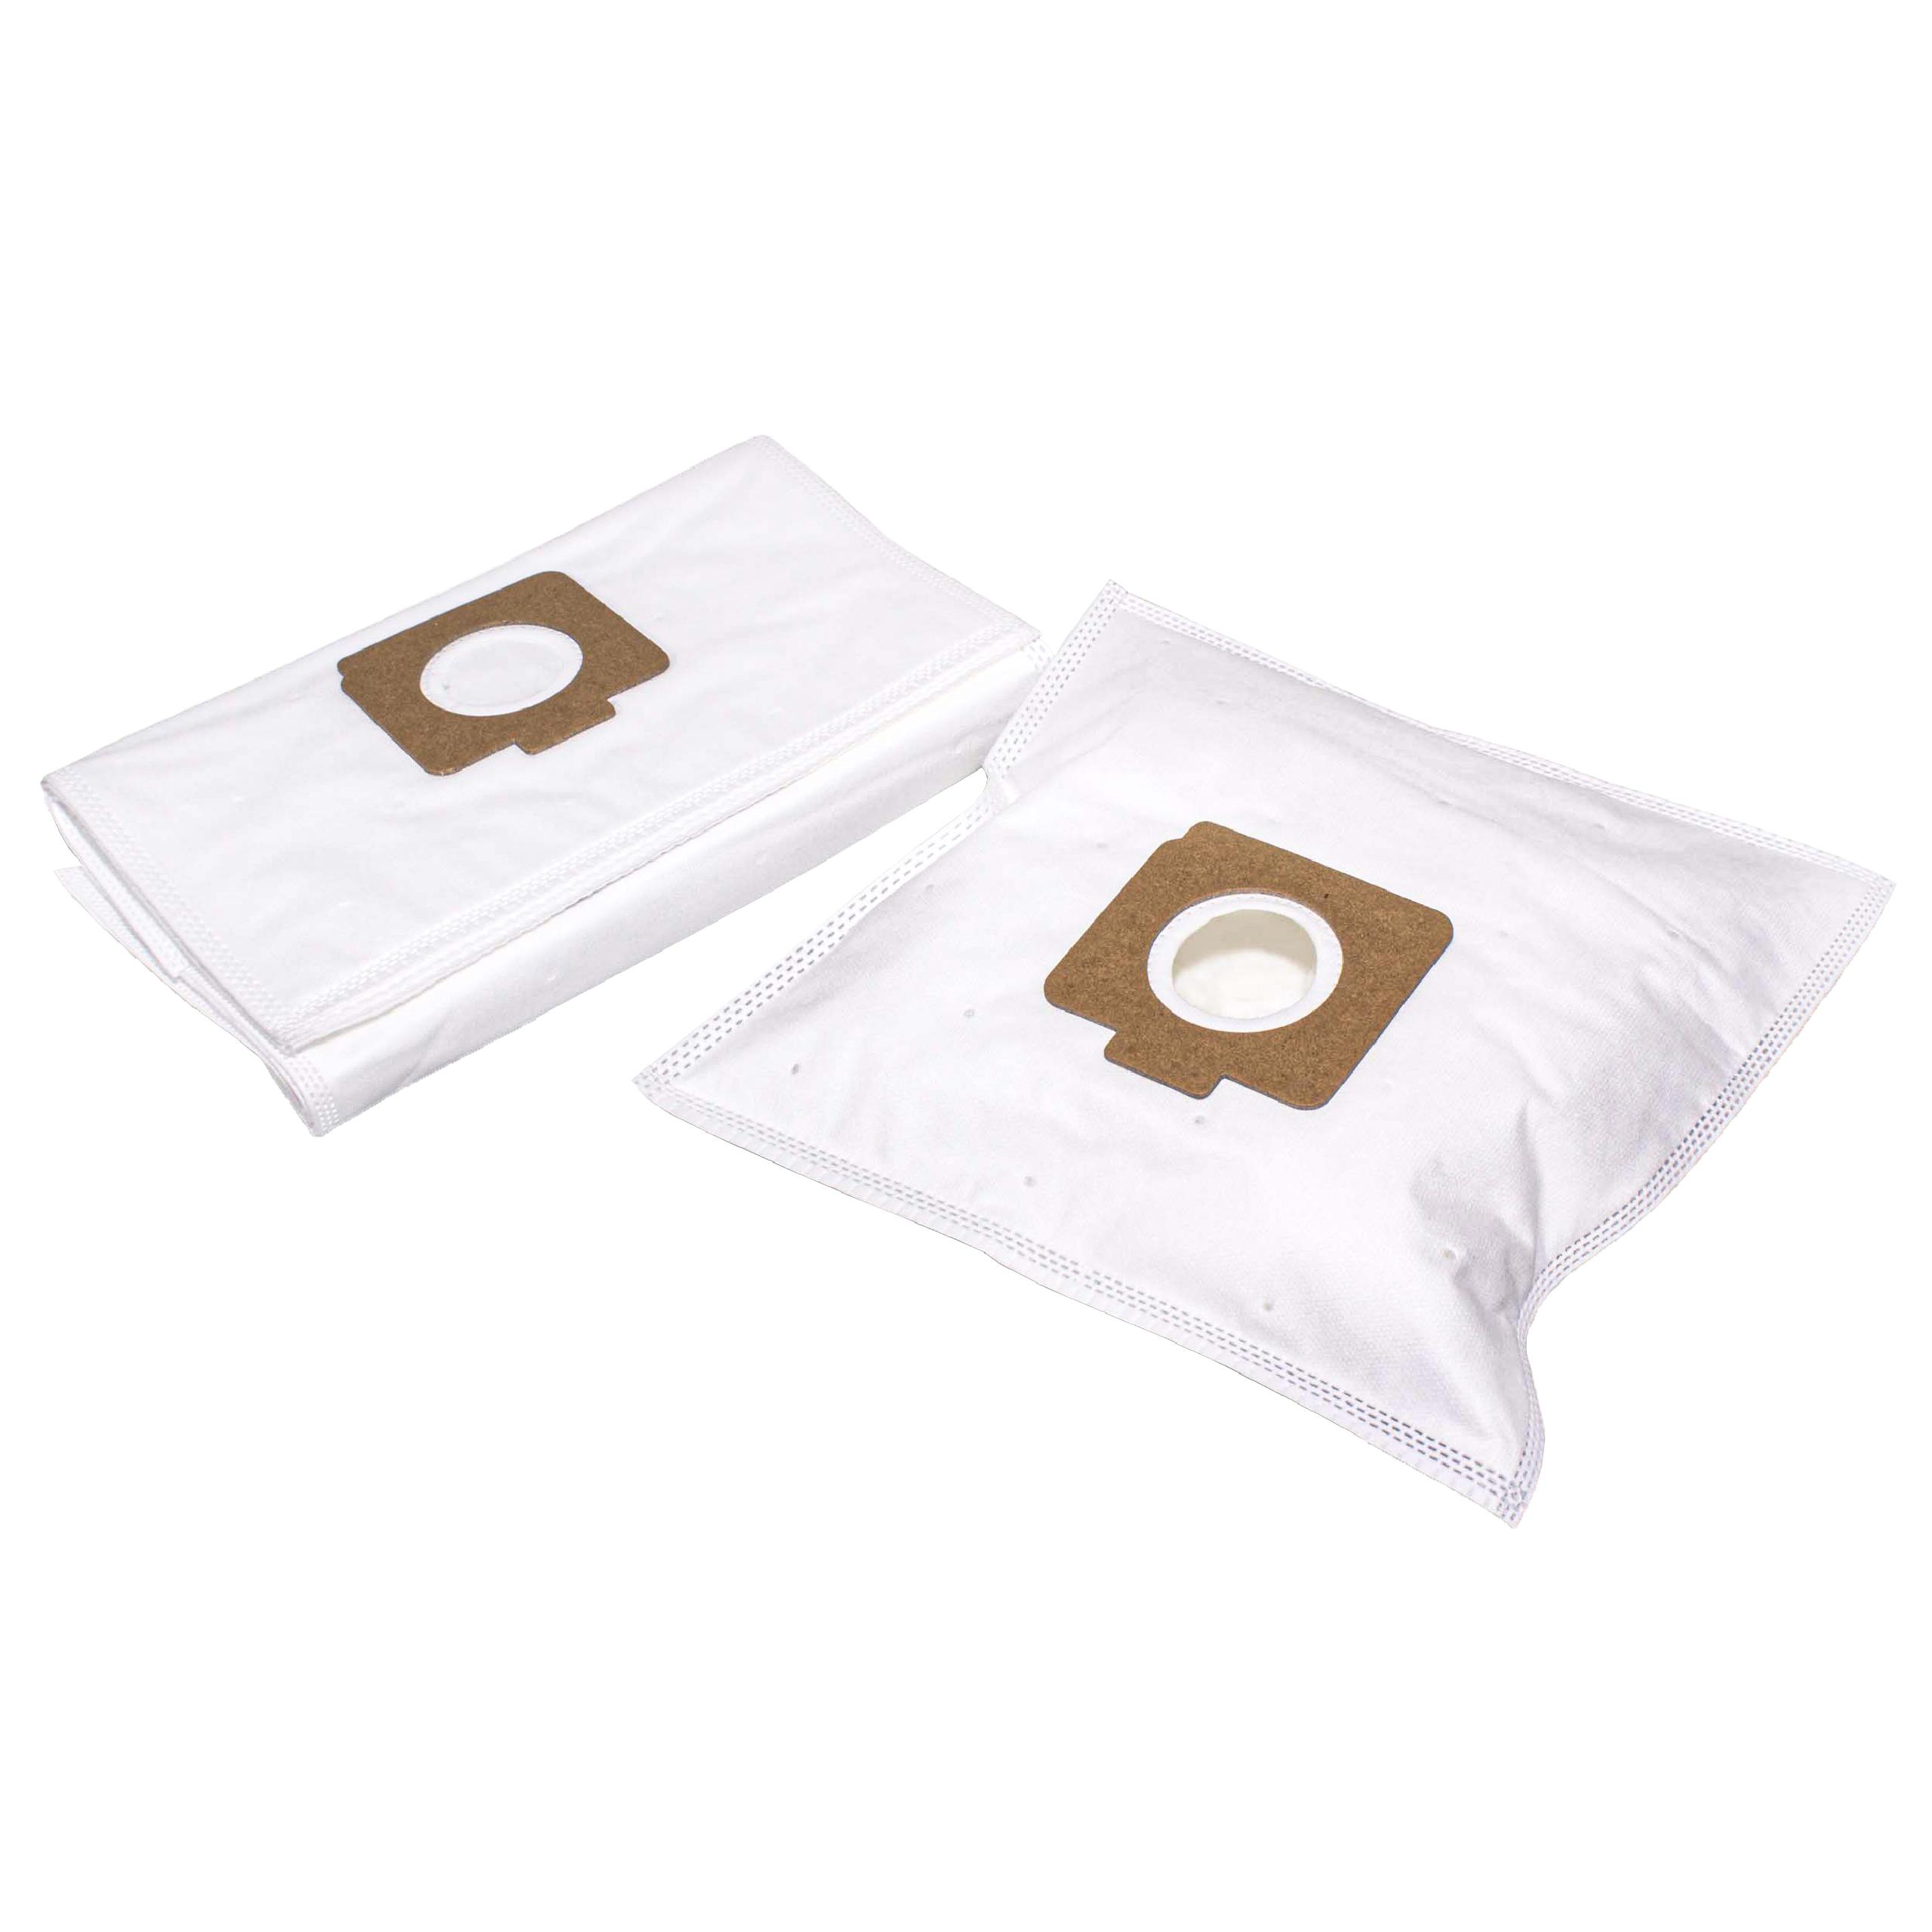 10x Vacuum Cleaner Bag replaces Moulinex MO3927PA, 9A82030, MO3953PA for Moulinex - microfleece